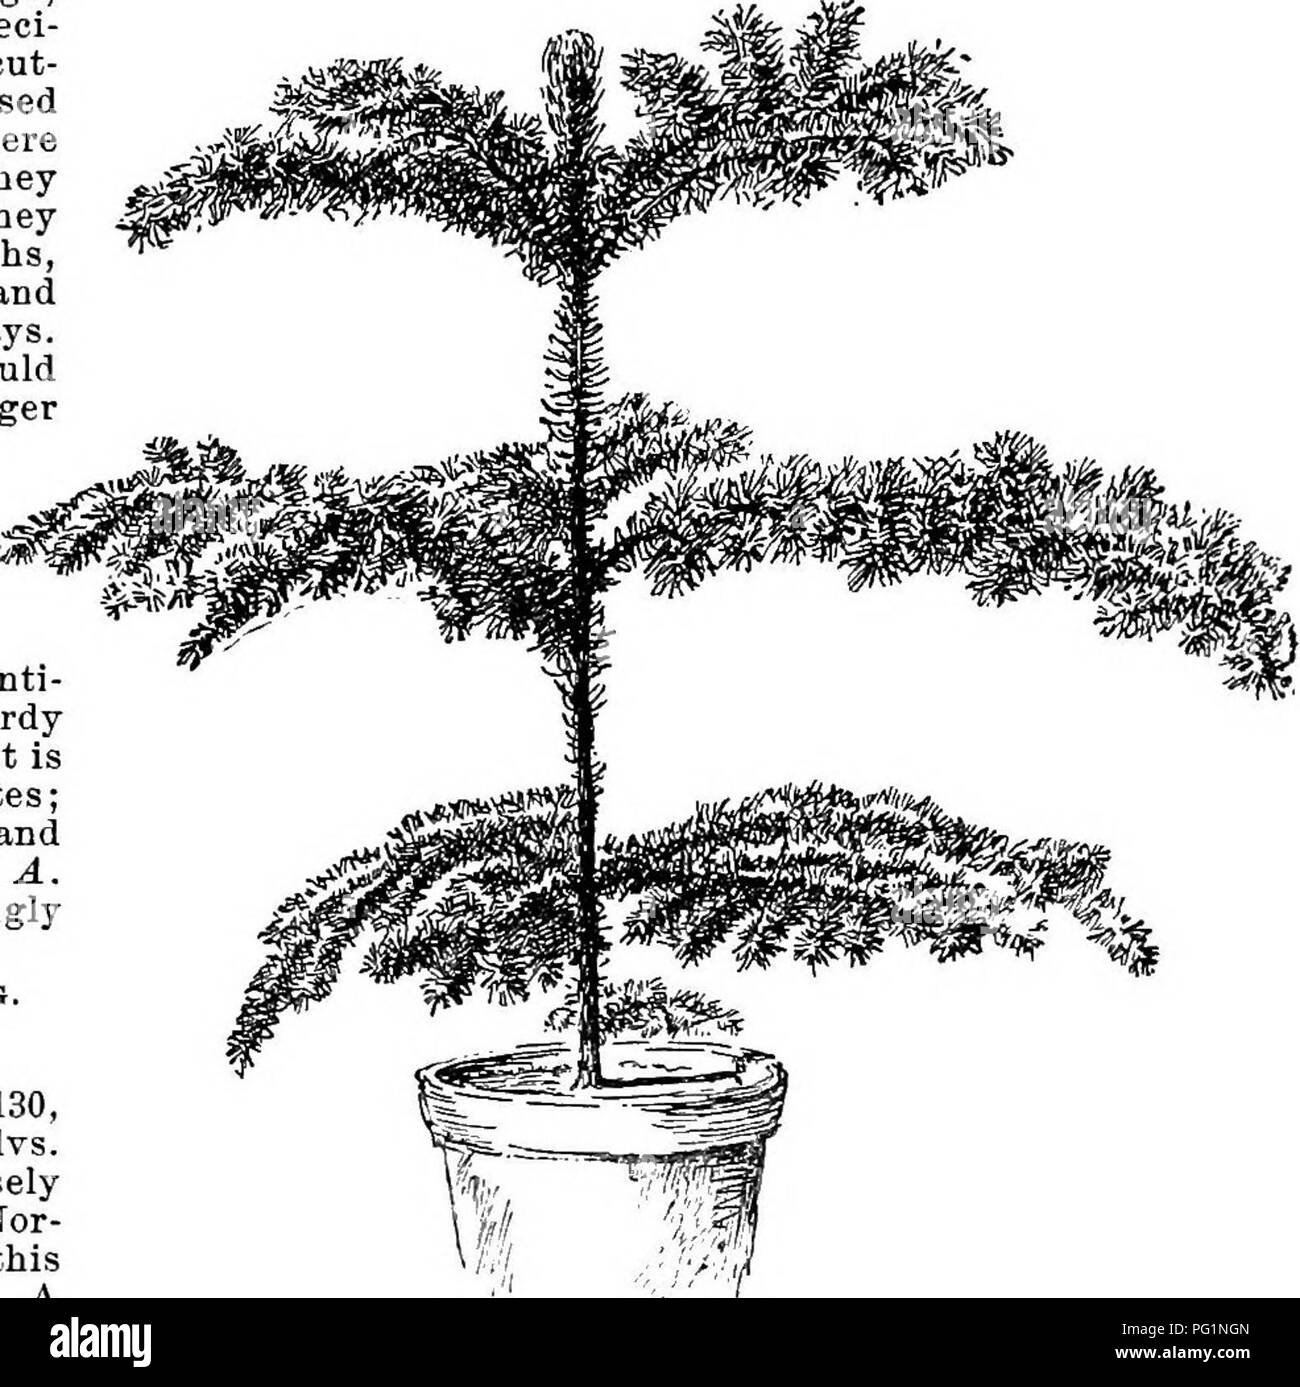 . Cyclopedia of American horticulture, comprising suggestions for cultivation of horticultural plants, descriptions of the species of fruits, vegetables, flowers, and ornamental plants sold in the United States and Canada, together with geographical and biographical sketches. Gardening. 130, Good specimen of Araucaria excelsa. begun to grow them in considerable quantities in the past five years, but it is likely that Ghent will be the main source of supply for many years to come. A few are now propagated in this country, and as they grow easily here, it is liliely that the number will be large Stock Photo